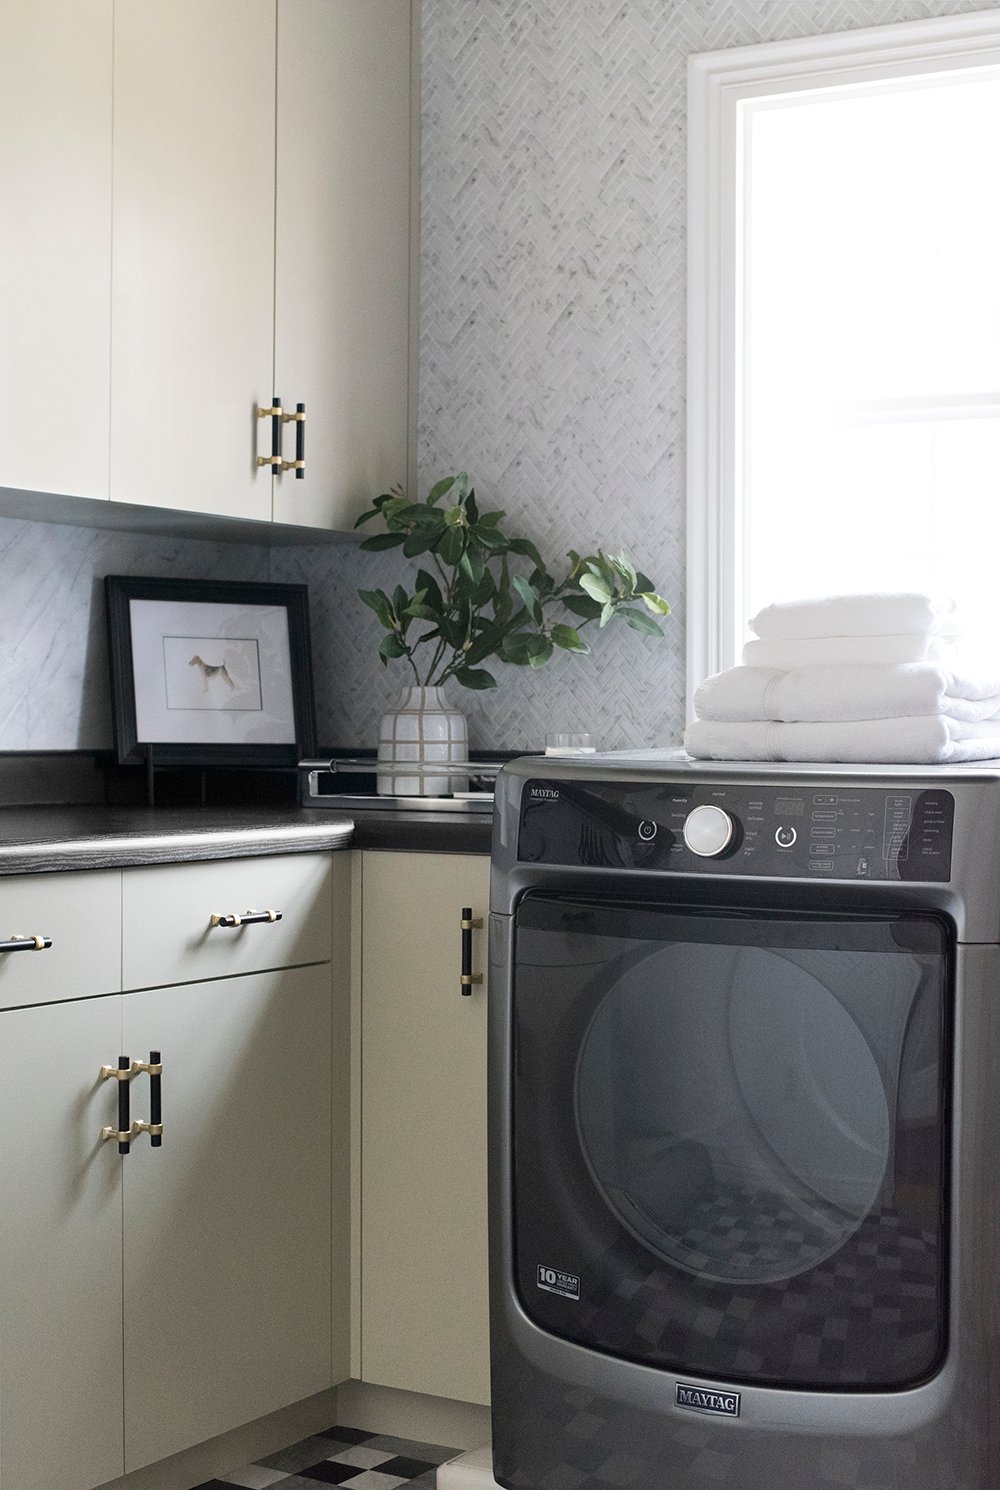 Budget Friendly Laundry Room Makeover - roomfortuesday.com